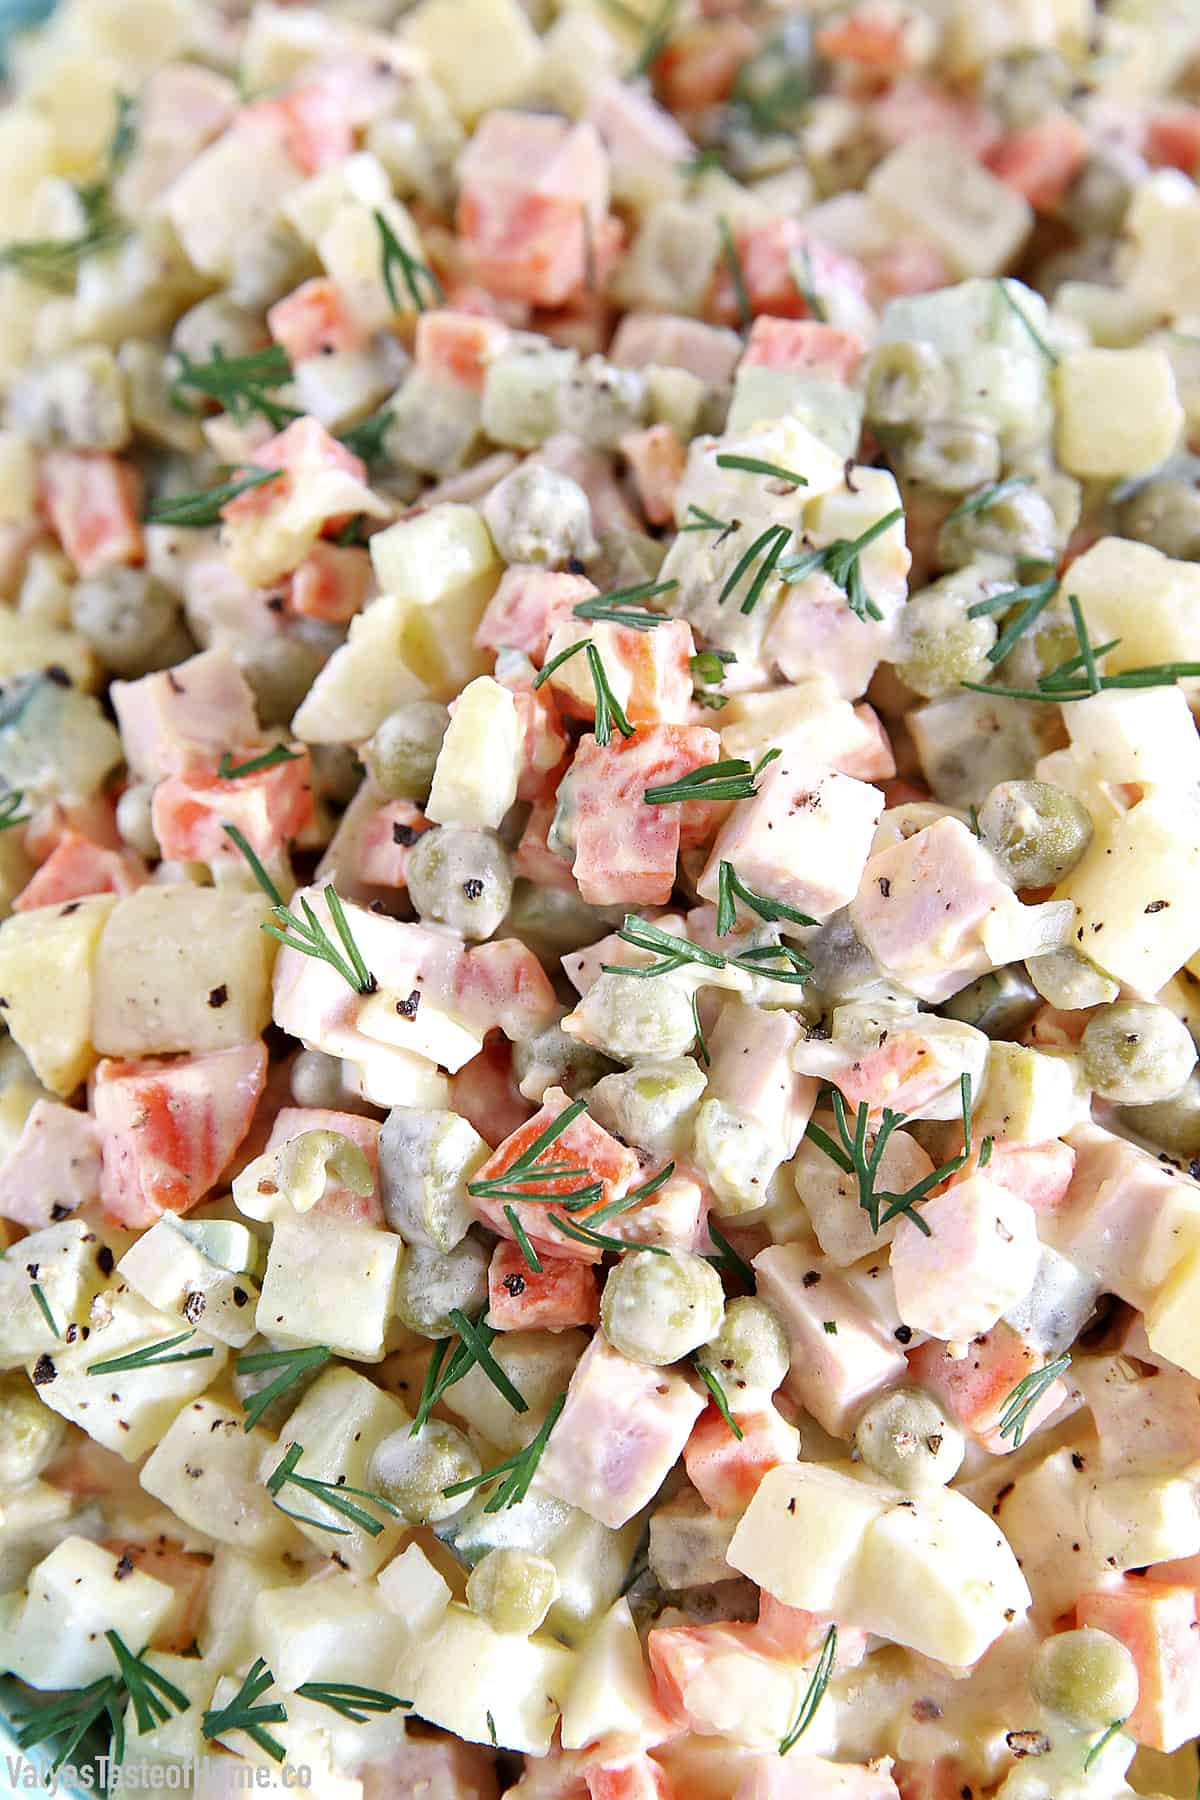 Potato salad is the ultimate summer comfort food, and this recipe is the perfect way to enjoy your salad. It’s the easiest potato salad recipe out there that is guaranteed to give you delicious flavor every single time.